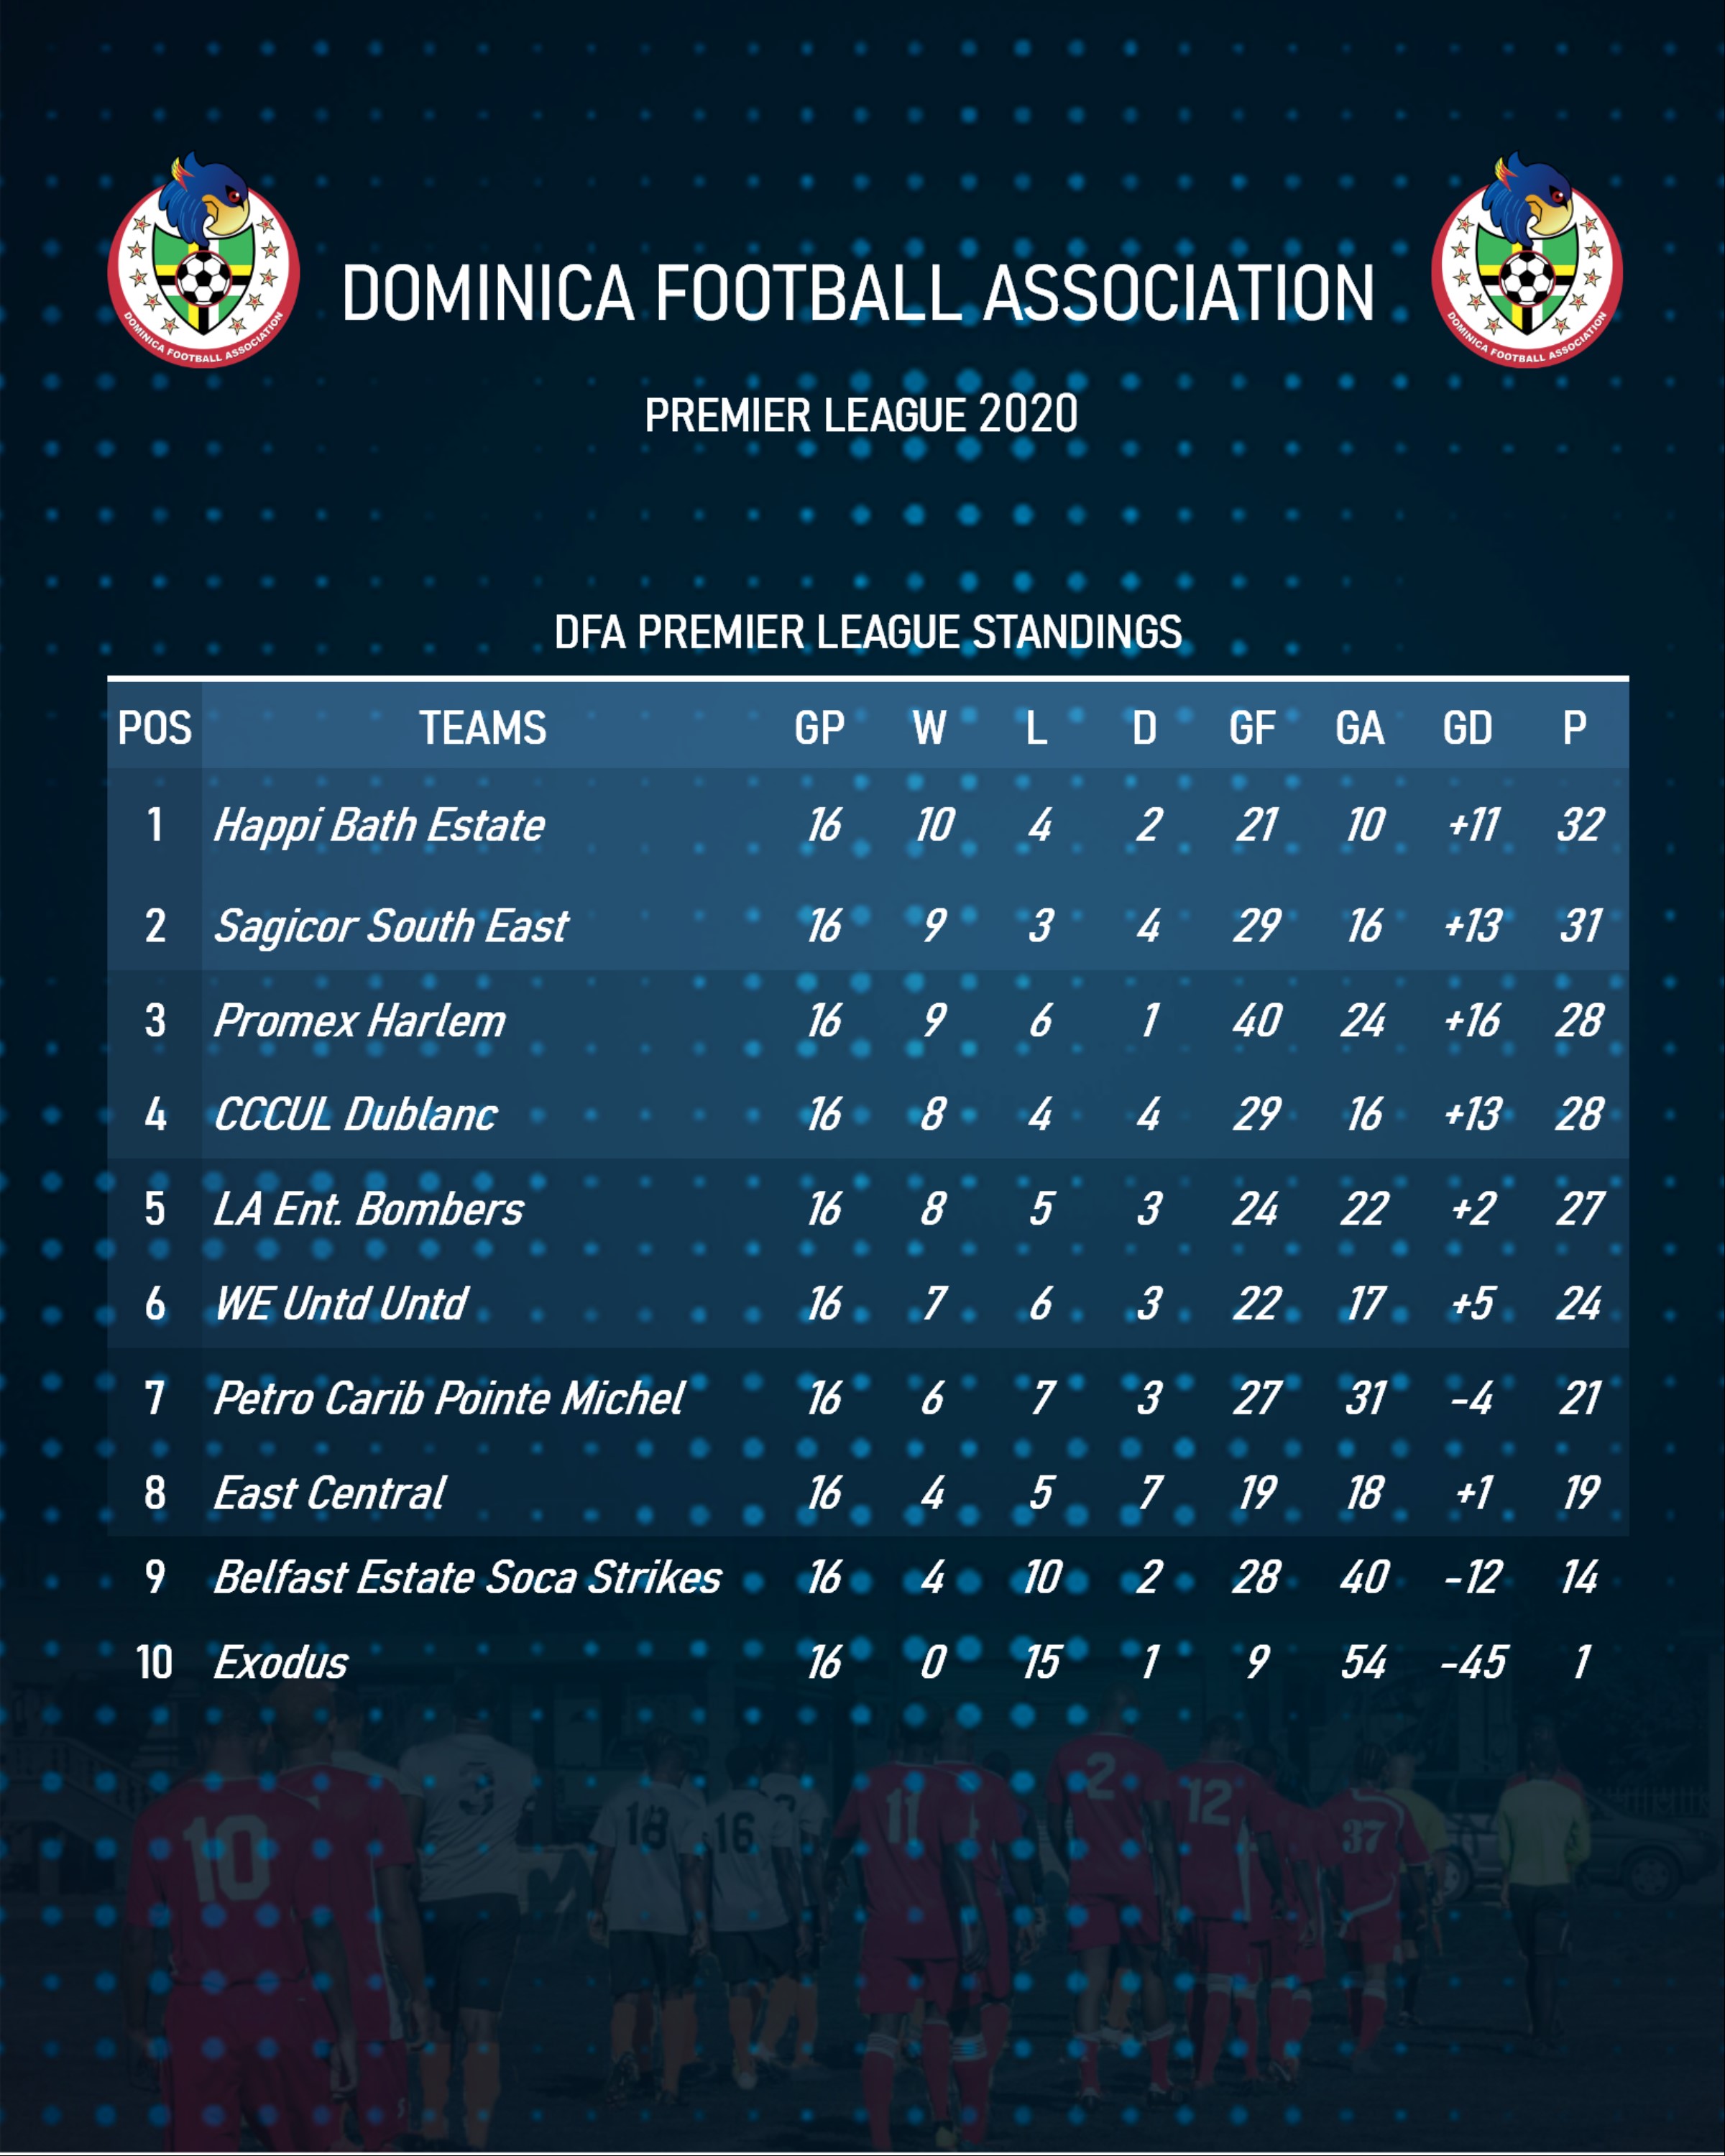 uefa conference league standing